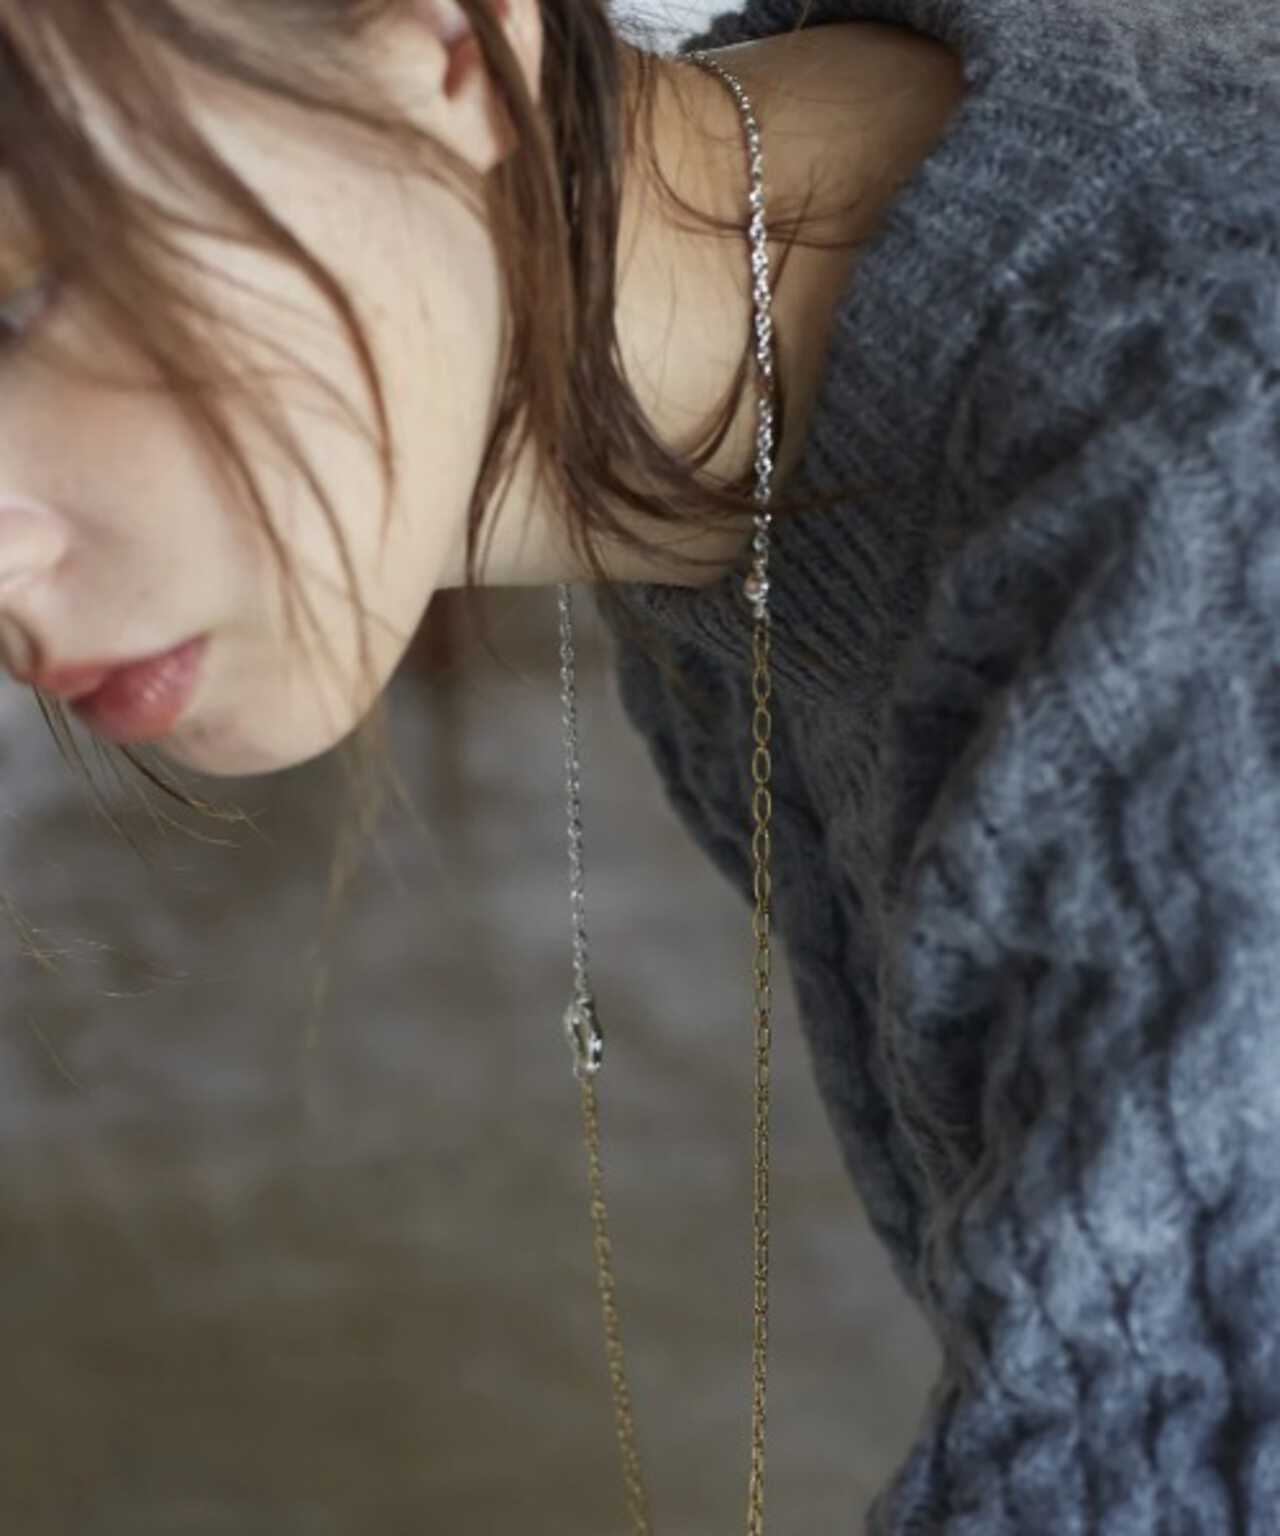 Nothing And Others/DoubleChain Necklace | ROYAL FLASH ( ロイヤル